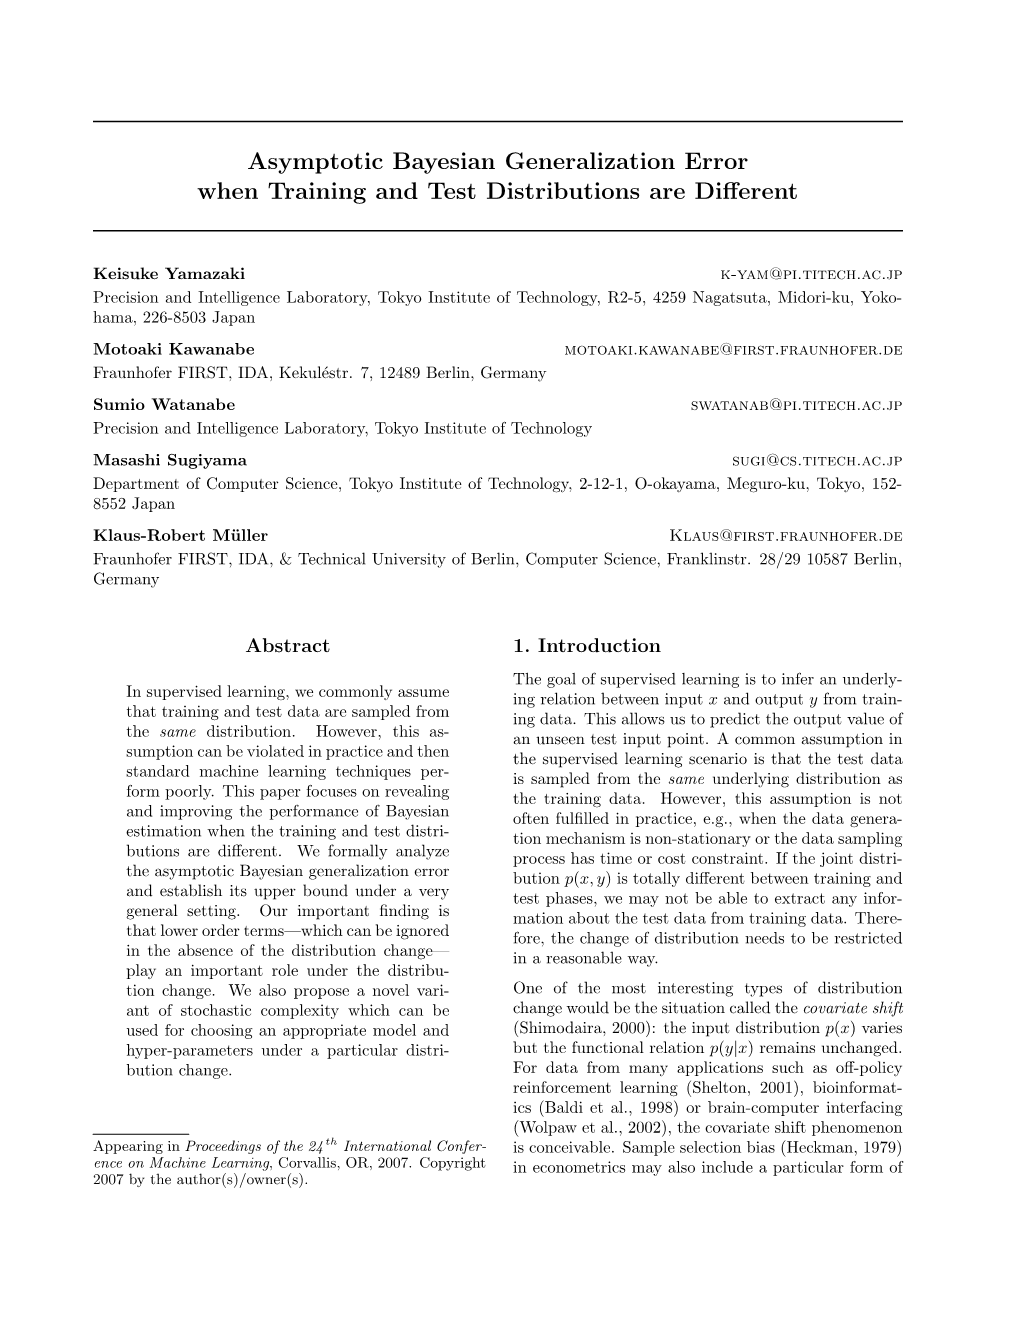 Asymptotic Bayesian Generalization Error When Training and Test Distributions Are Diﬀerent